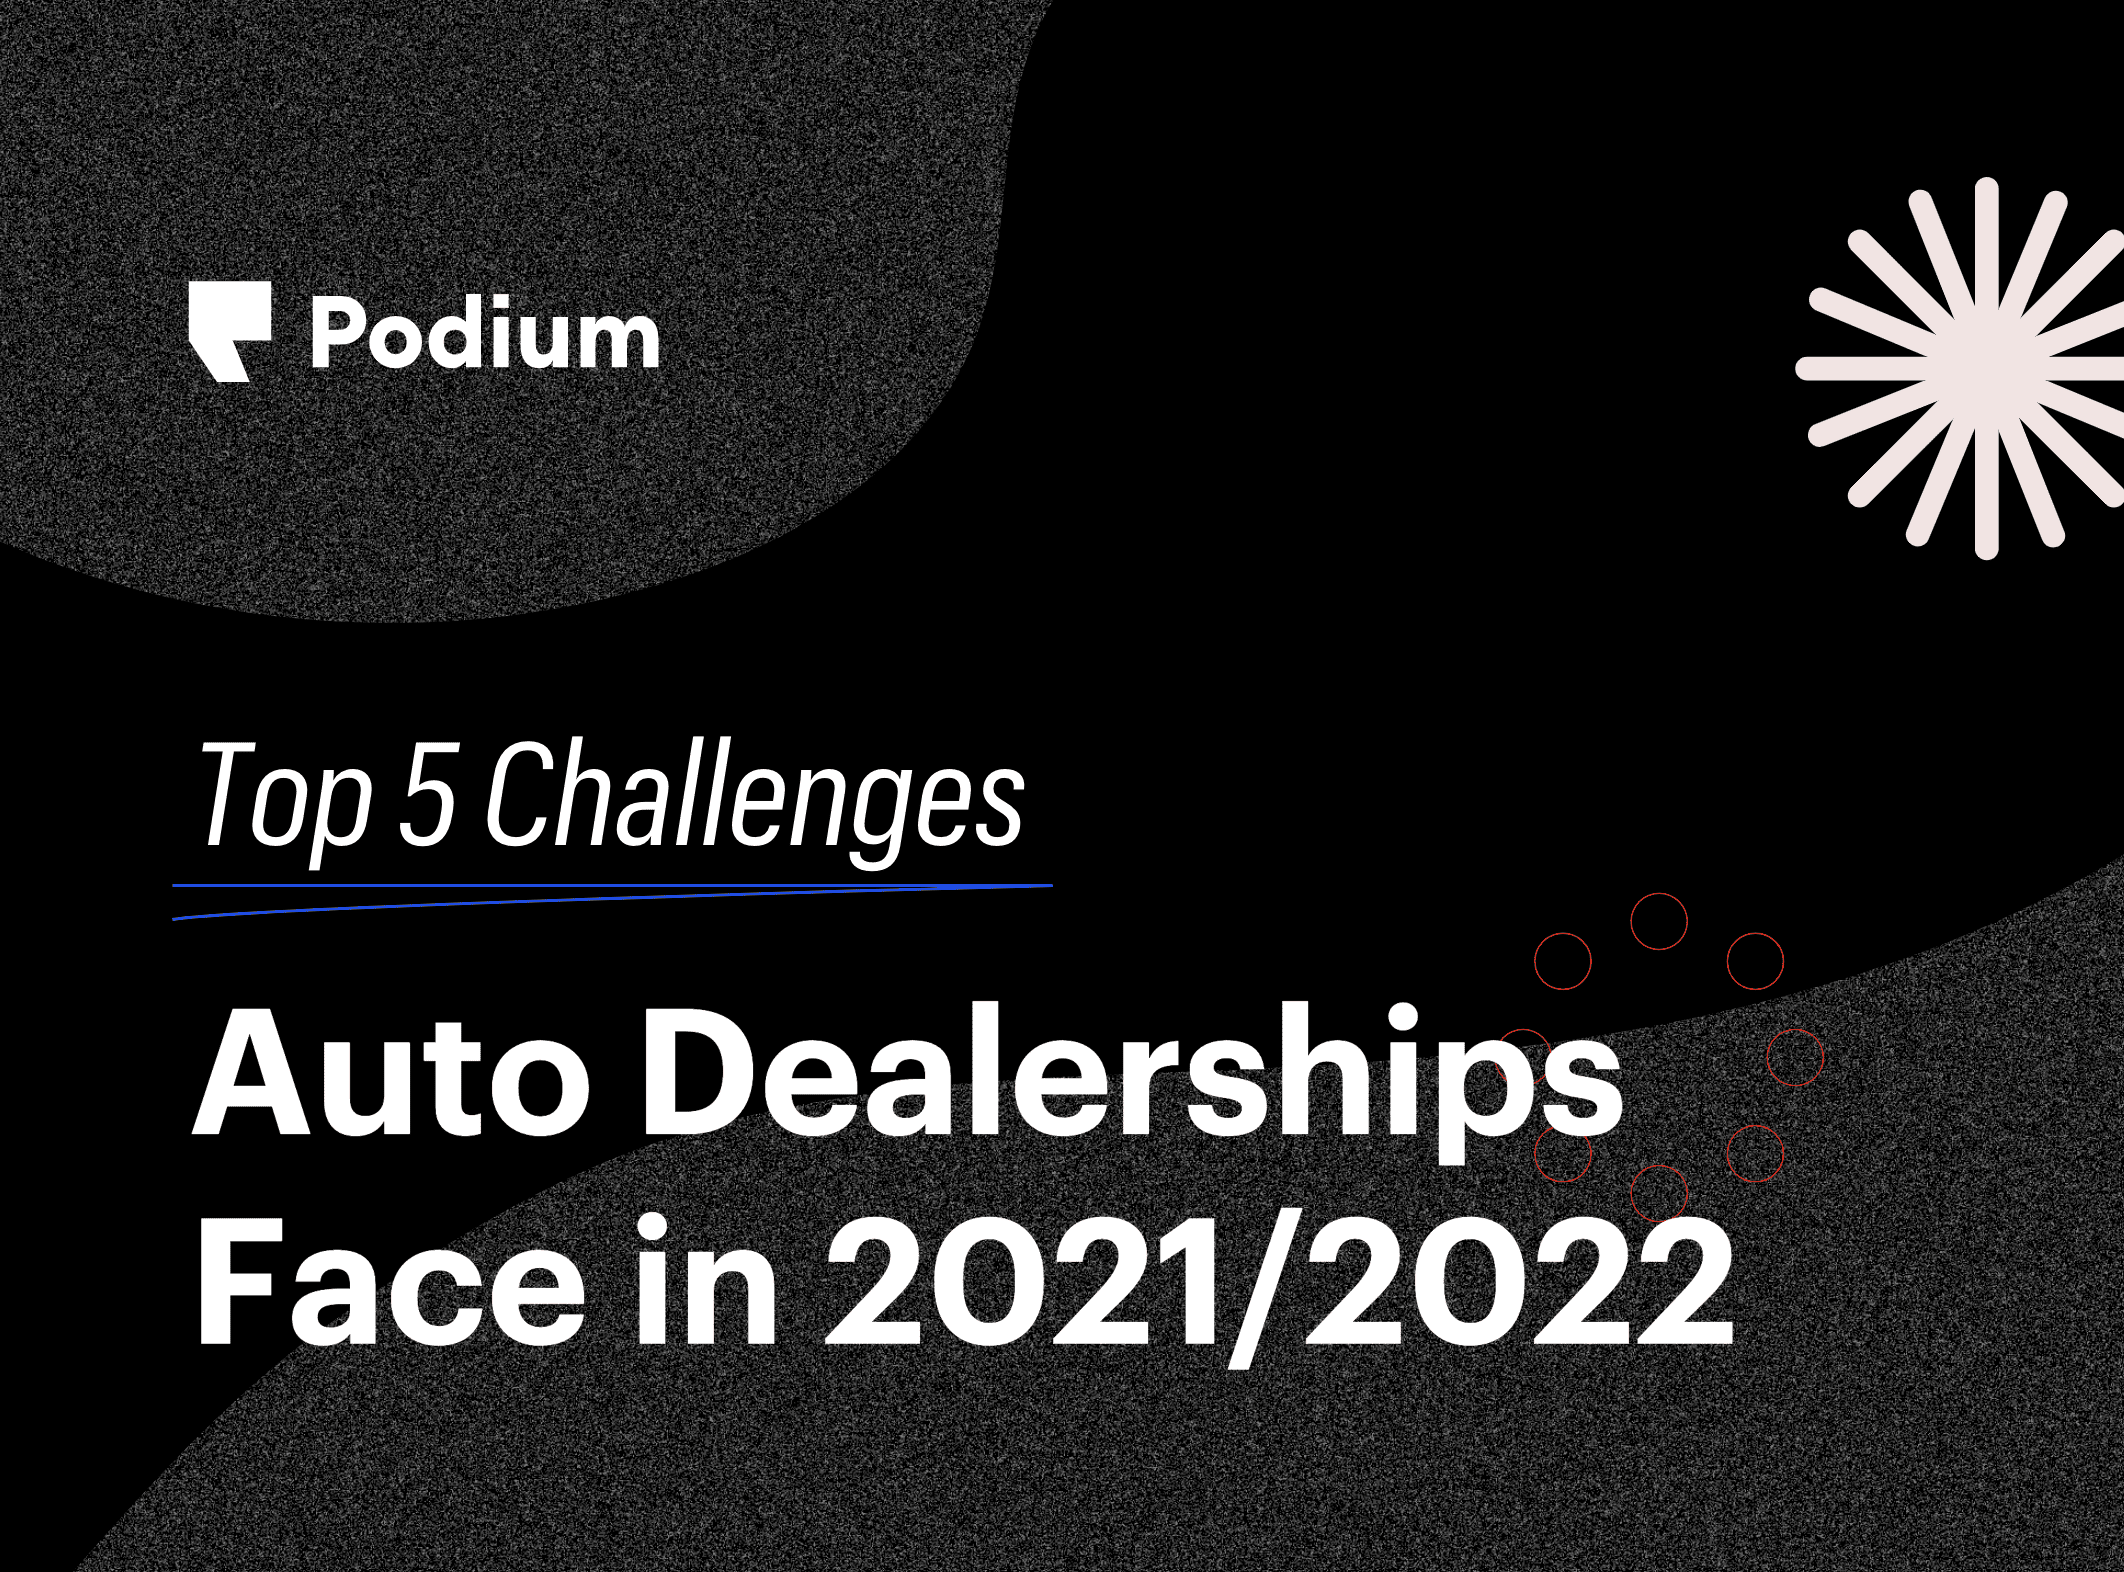 Top 5 Challenges Auto Dealerships Face in 2021/2022